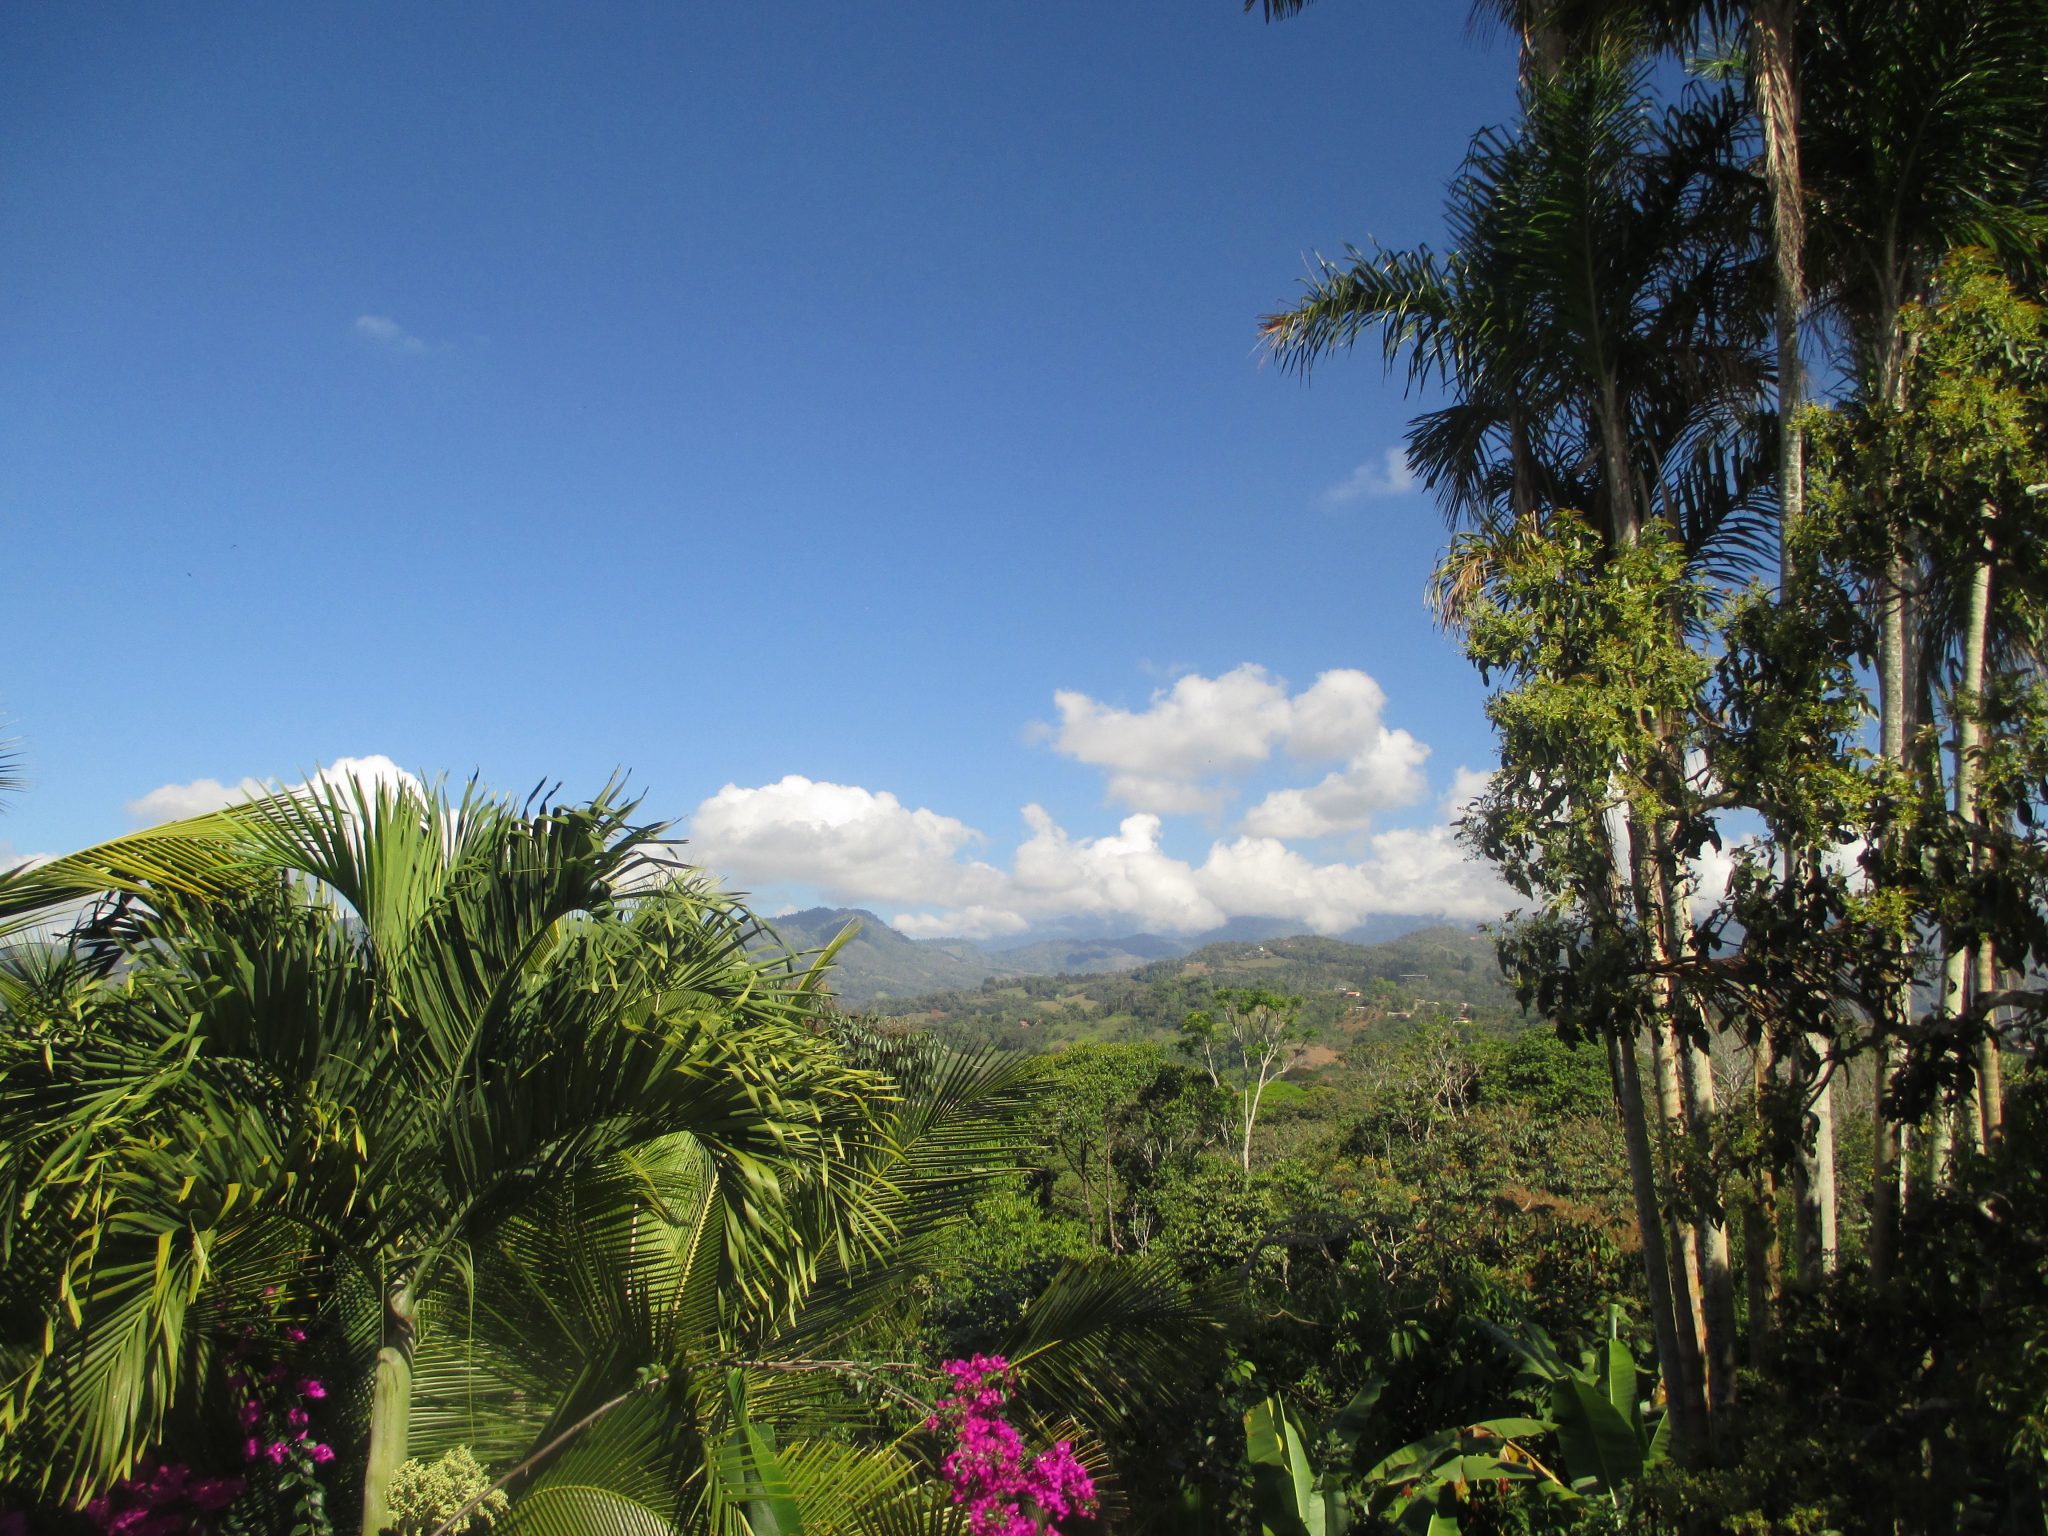 The view of the mountains from the school where the students study.